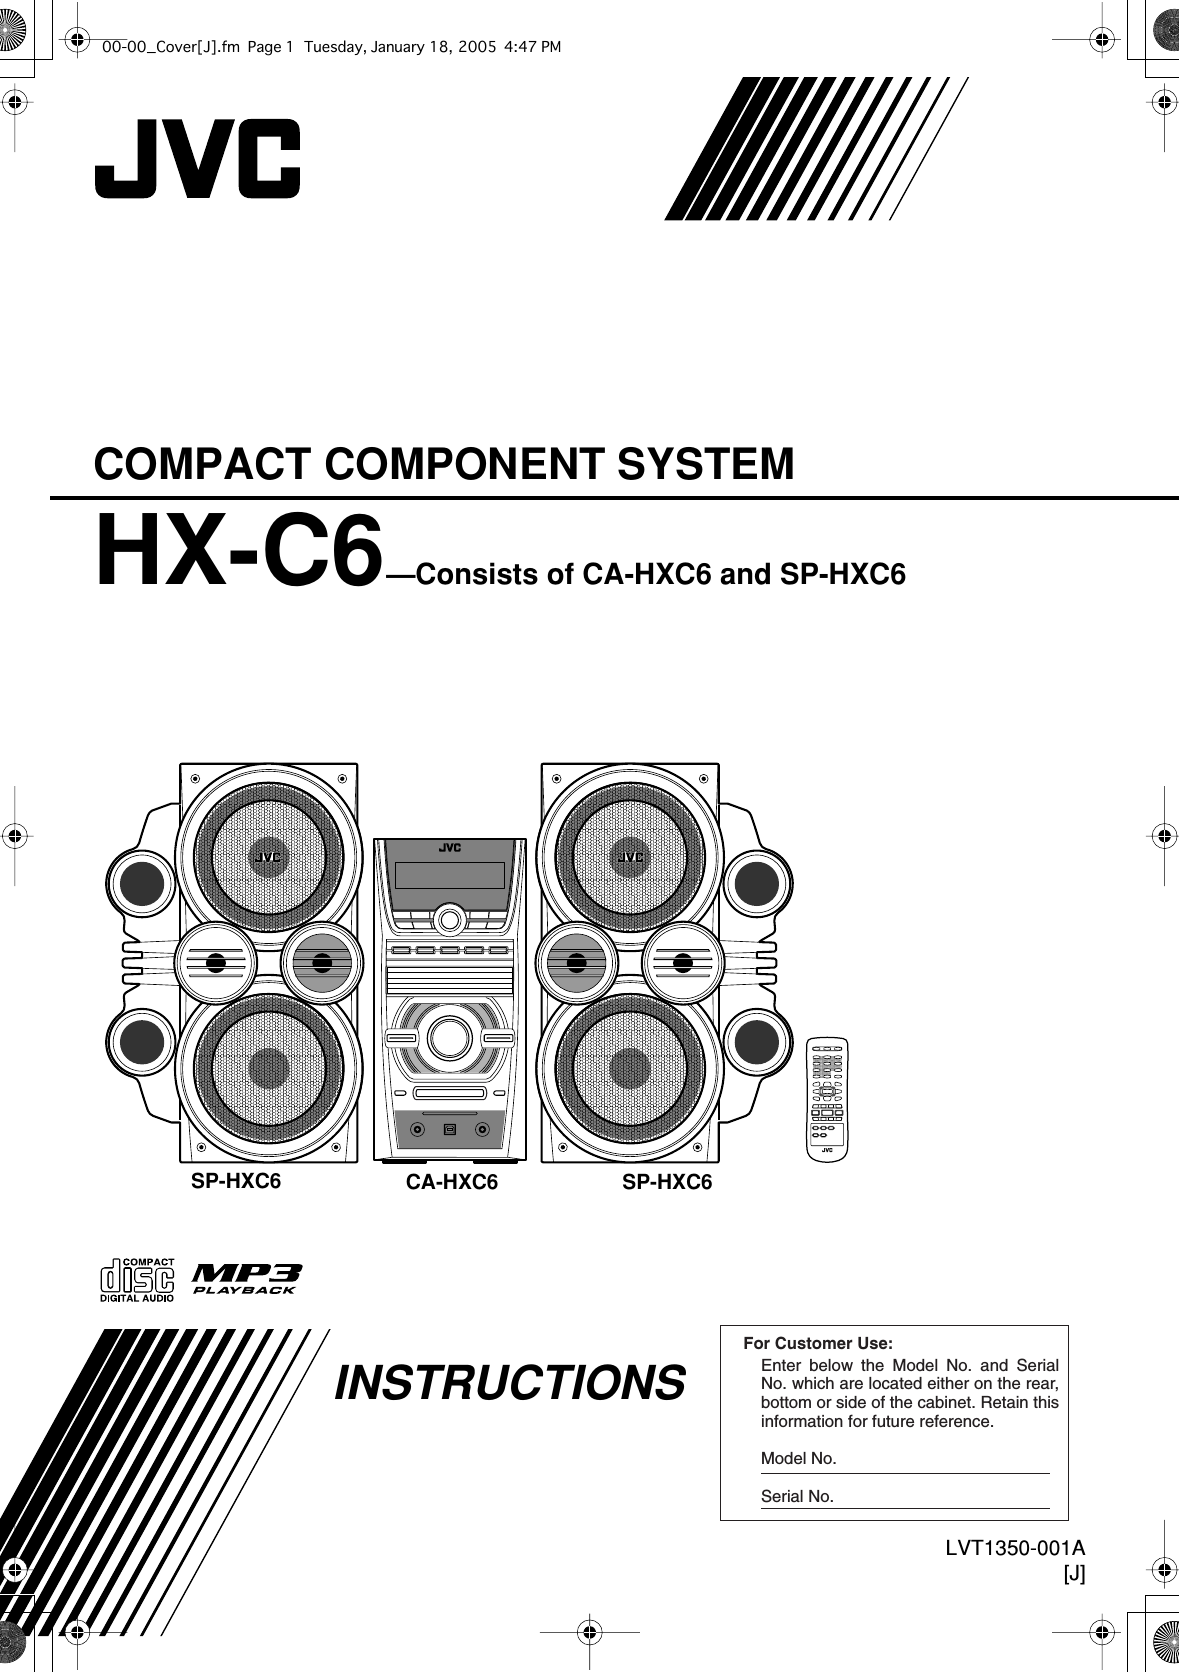  COMPACT COMPONENT SYSTEM HX-C6 —Consists of CA-HXC6 and SP-HXC6 INSTRUCTIONSFor Customer Use:Enter below the Model No. and Serial No. which are located either on the rear, bottom or side of the cabinet. Retain this information for future reference.Model No.Serial No. LVT1350-001A[J]CA-HXC6 SP-HXC6SP-HXC600-00_Cover[J].fm Page 1 Tuesday, January 18, 2005 4:47 PM